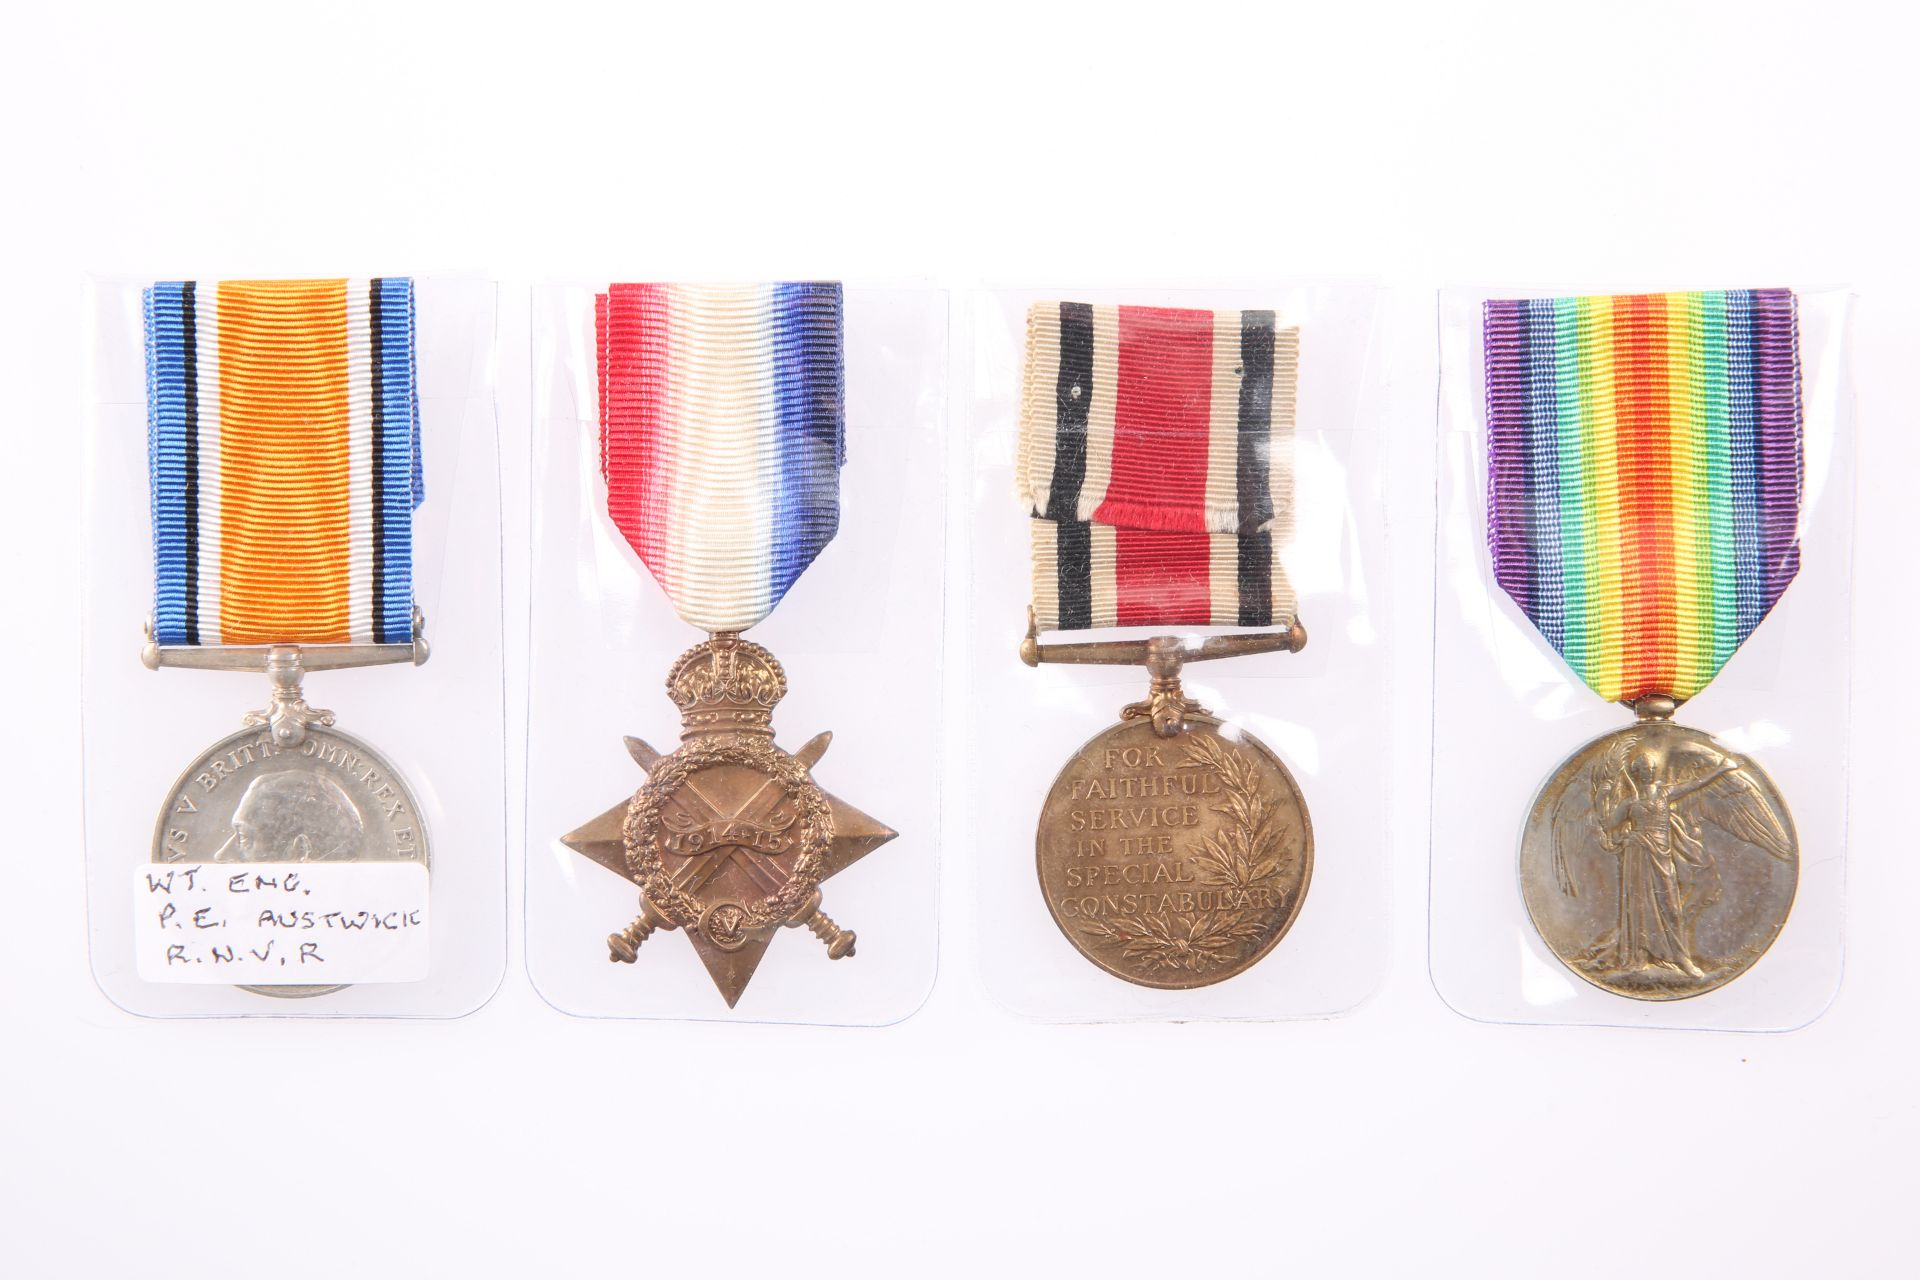 A WWI MEDAL GROUP, P.E. Austwick R.N.R., including Special Constabulary Service medal. (4)